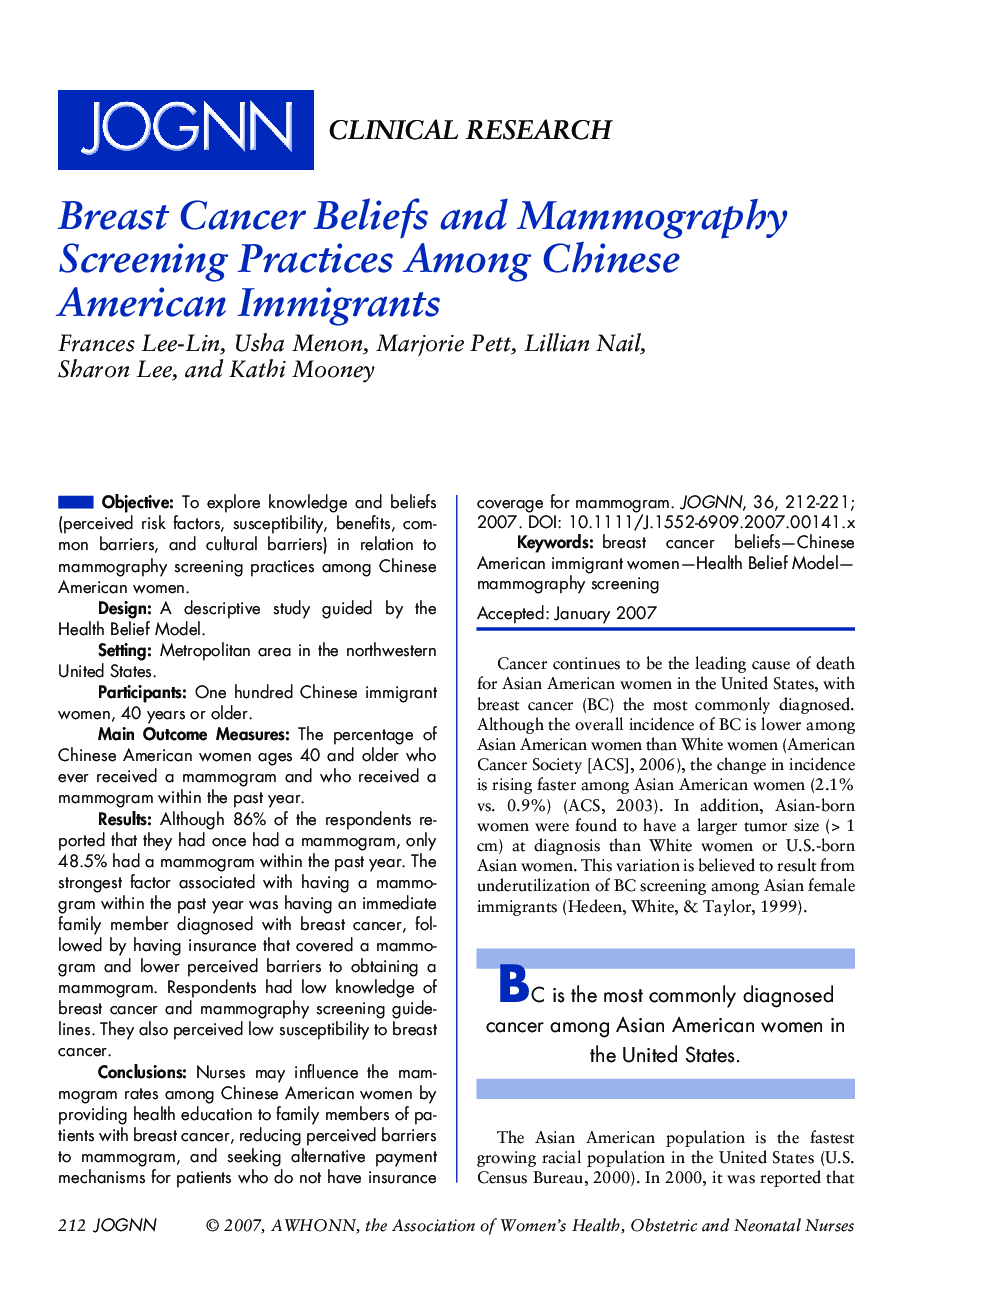 Breast Cancer Beliefs and Mammography Screening Practices Among Chinese American Immigrants